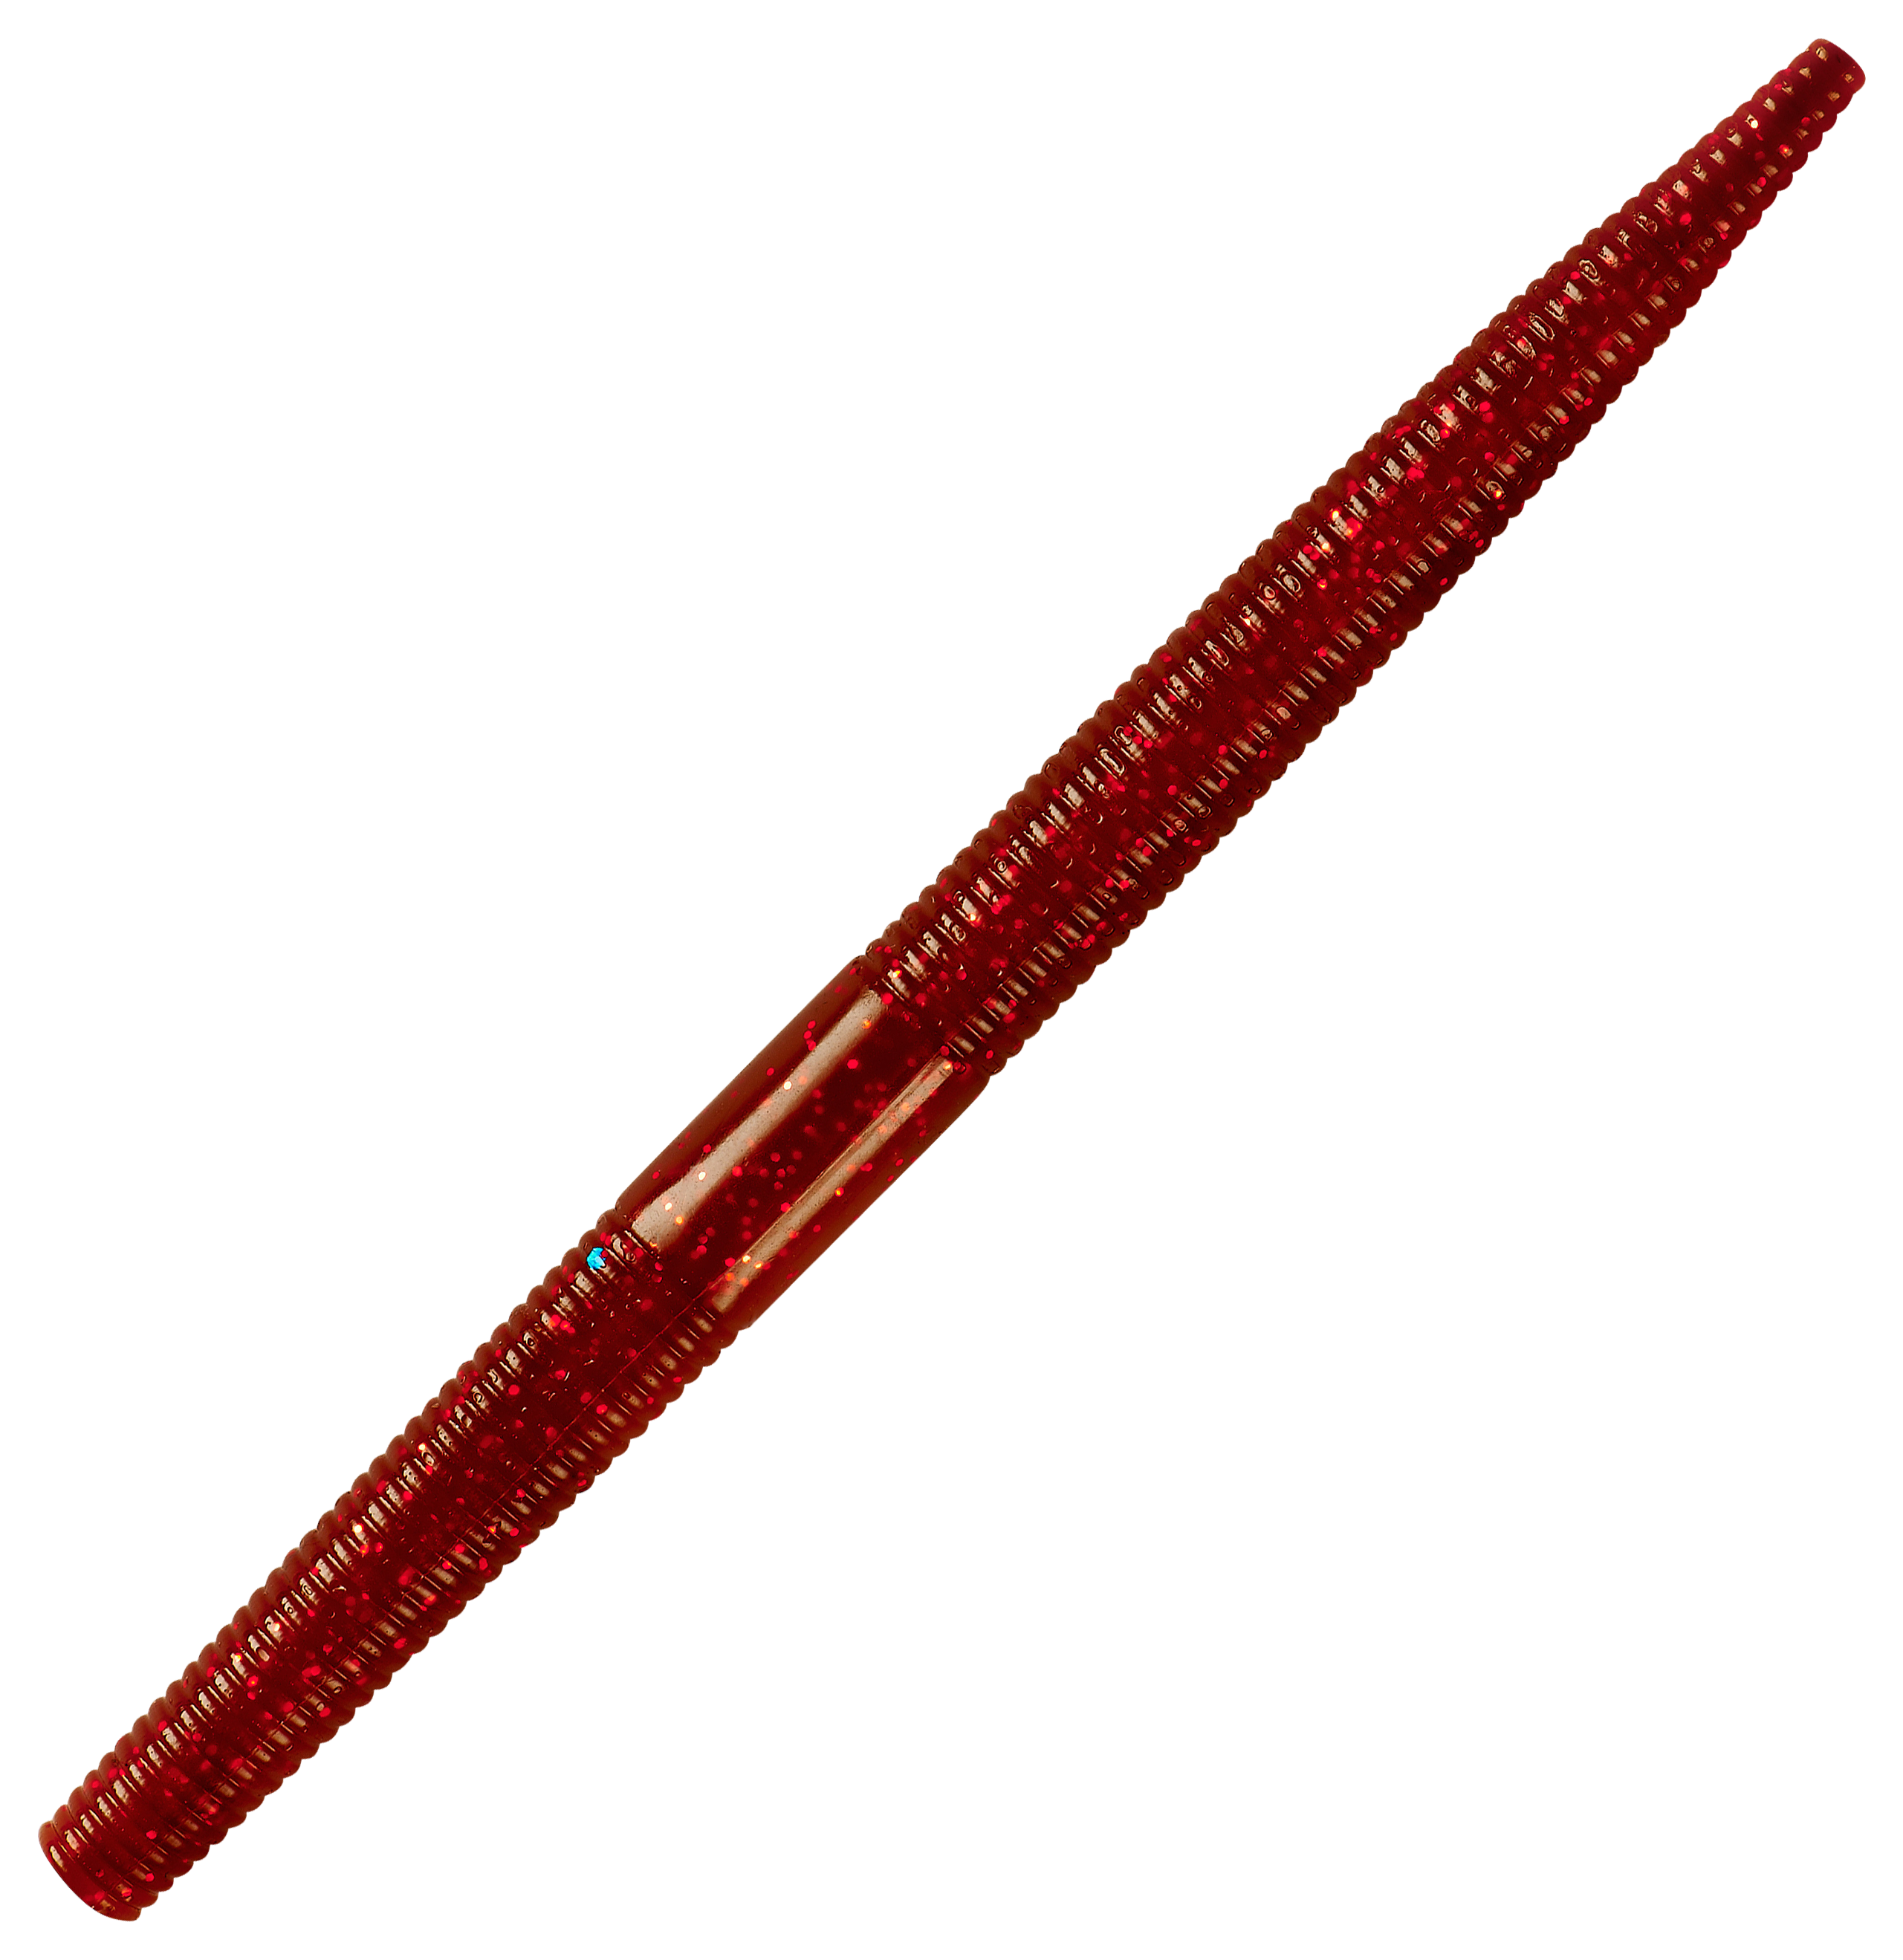 YUM Dinger - 5' -  Oxblood Red Flake